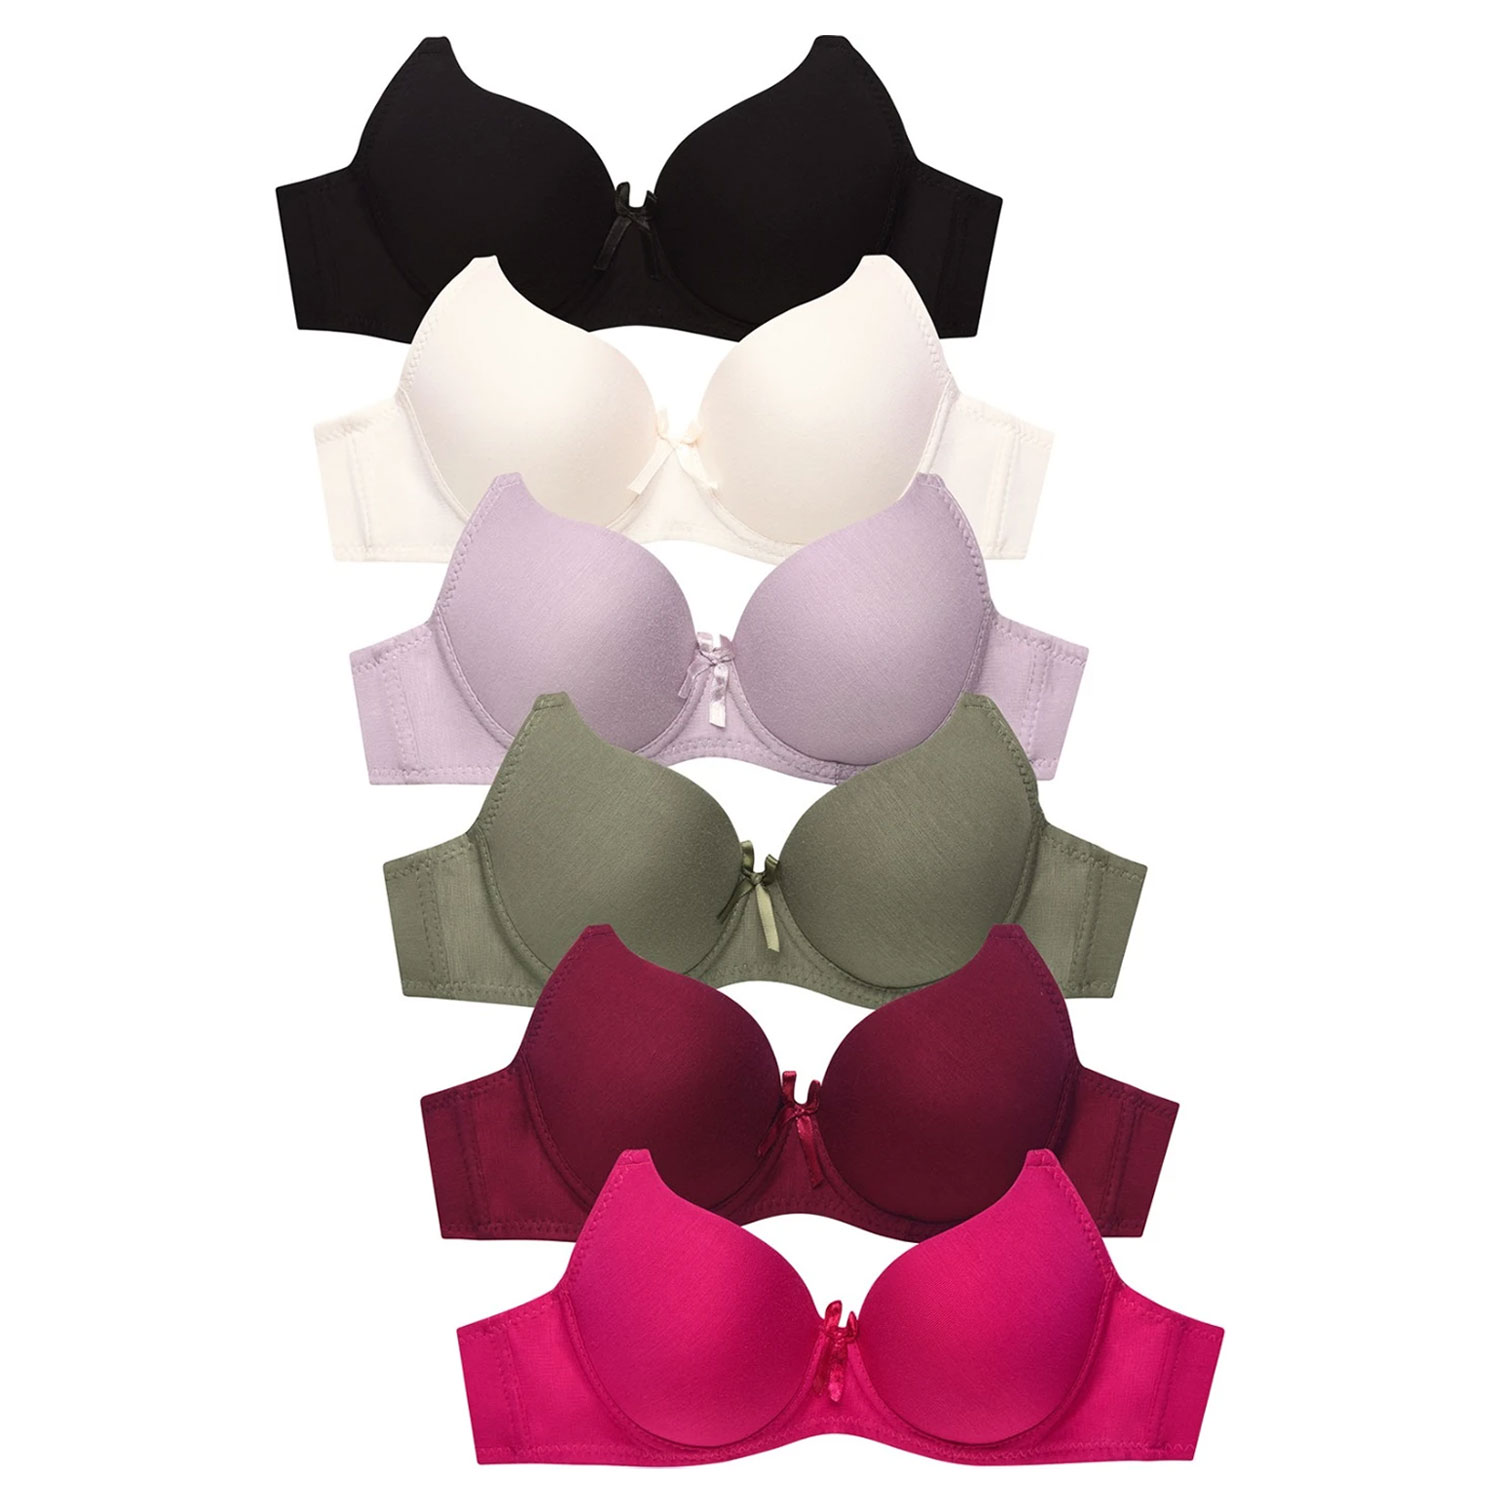 6 Pack Sofra Ladies Plain Cotton Bra 3hooks And Wide Strap